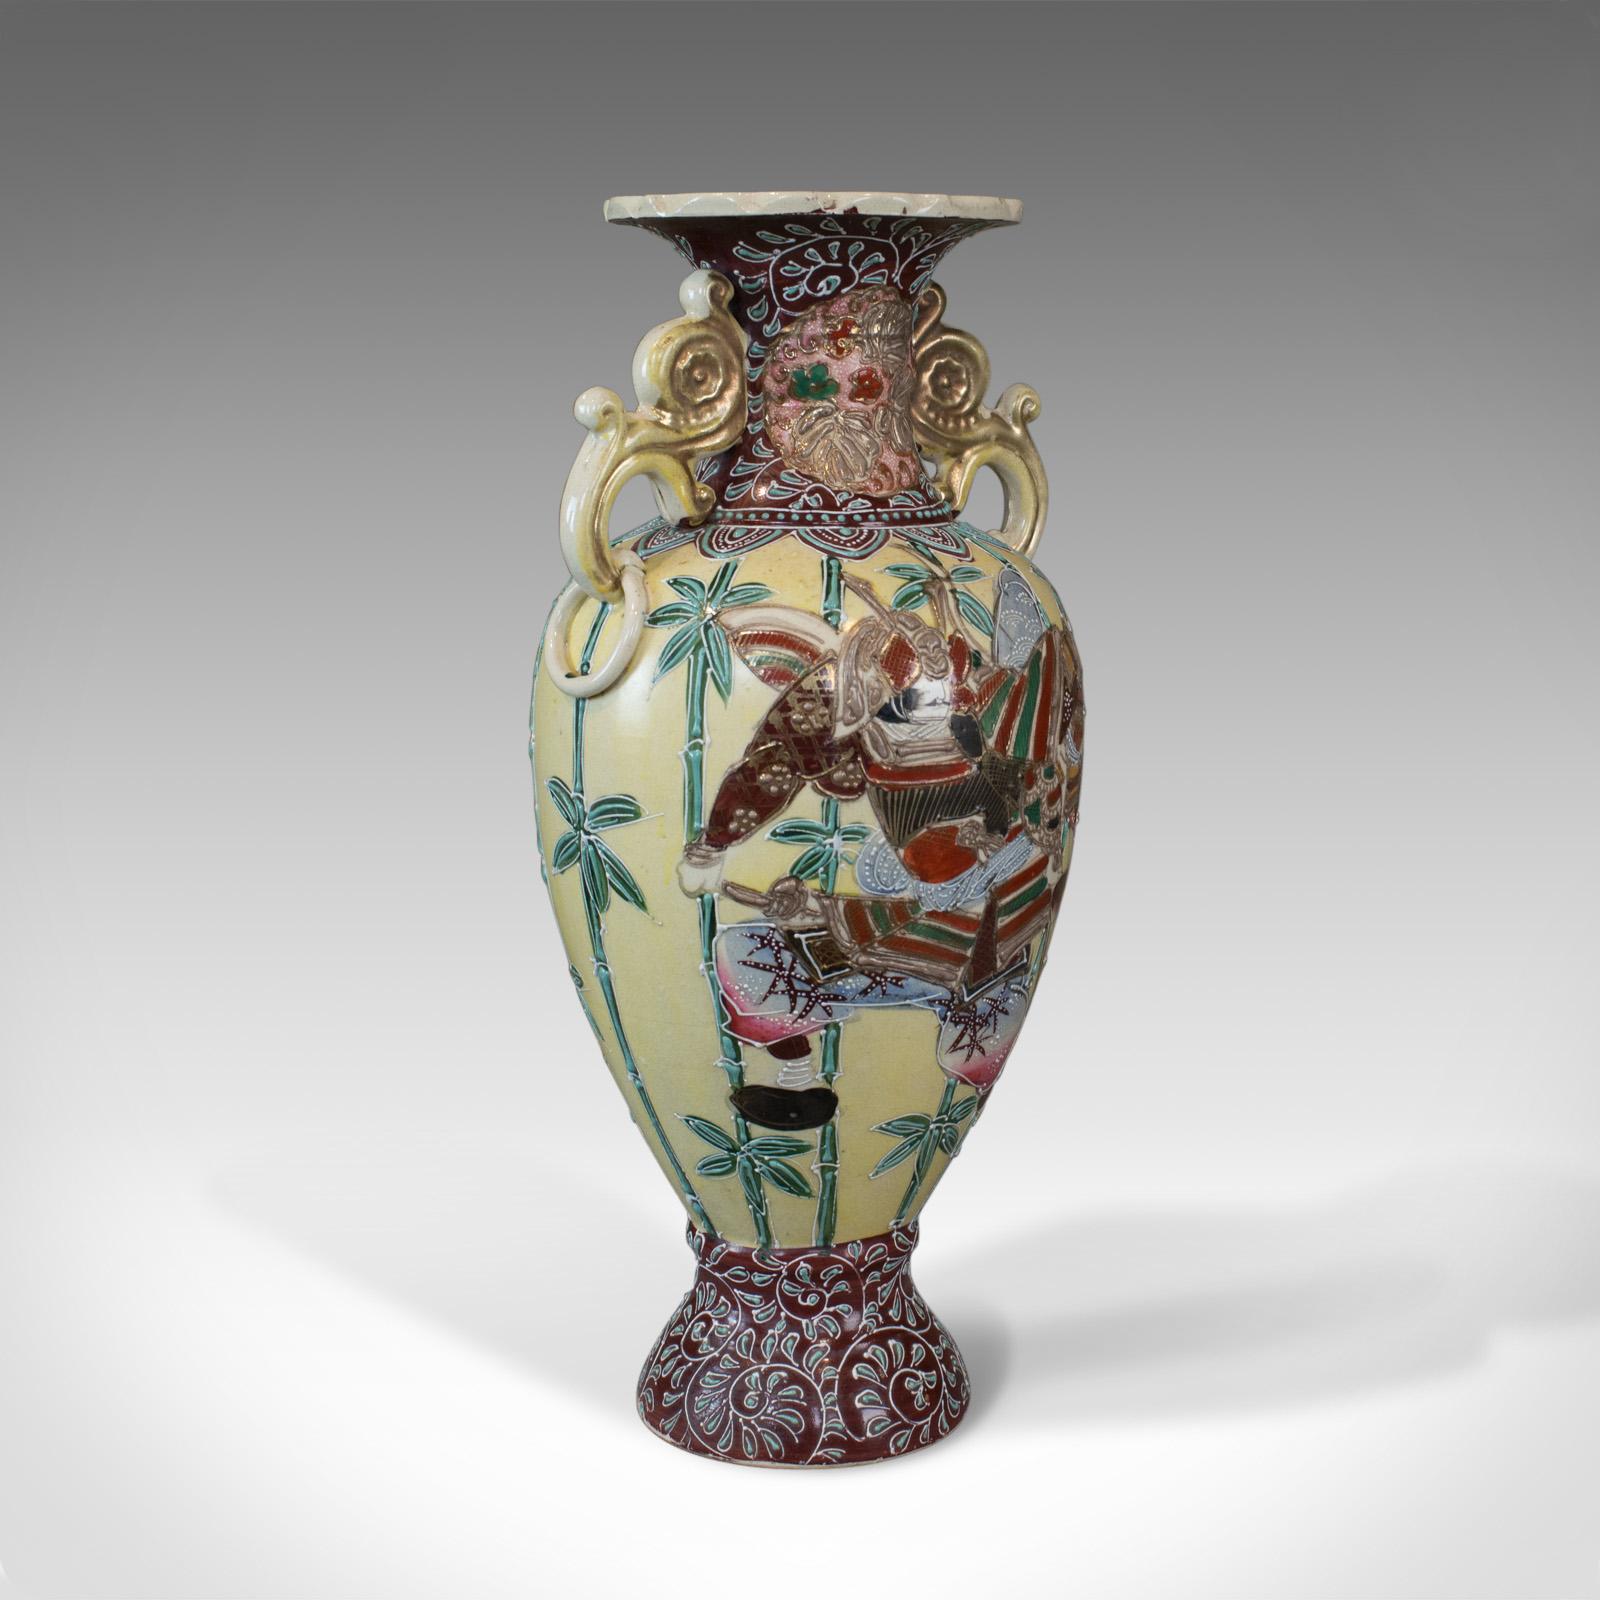 This is a vintage baluster vase, a highly decorative, oriental ceramic urn dating to the mid 20th century.

Of classic form and in good proportion
Of quality craftsmanship, free from damage
Without maker's mark to the base which displays some